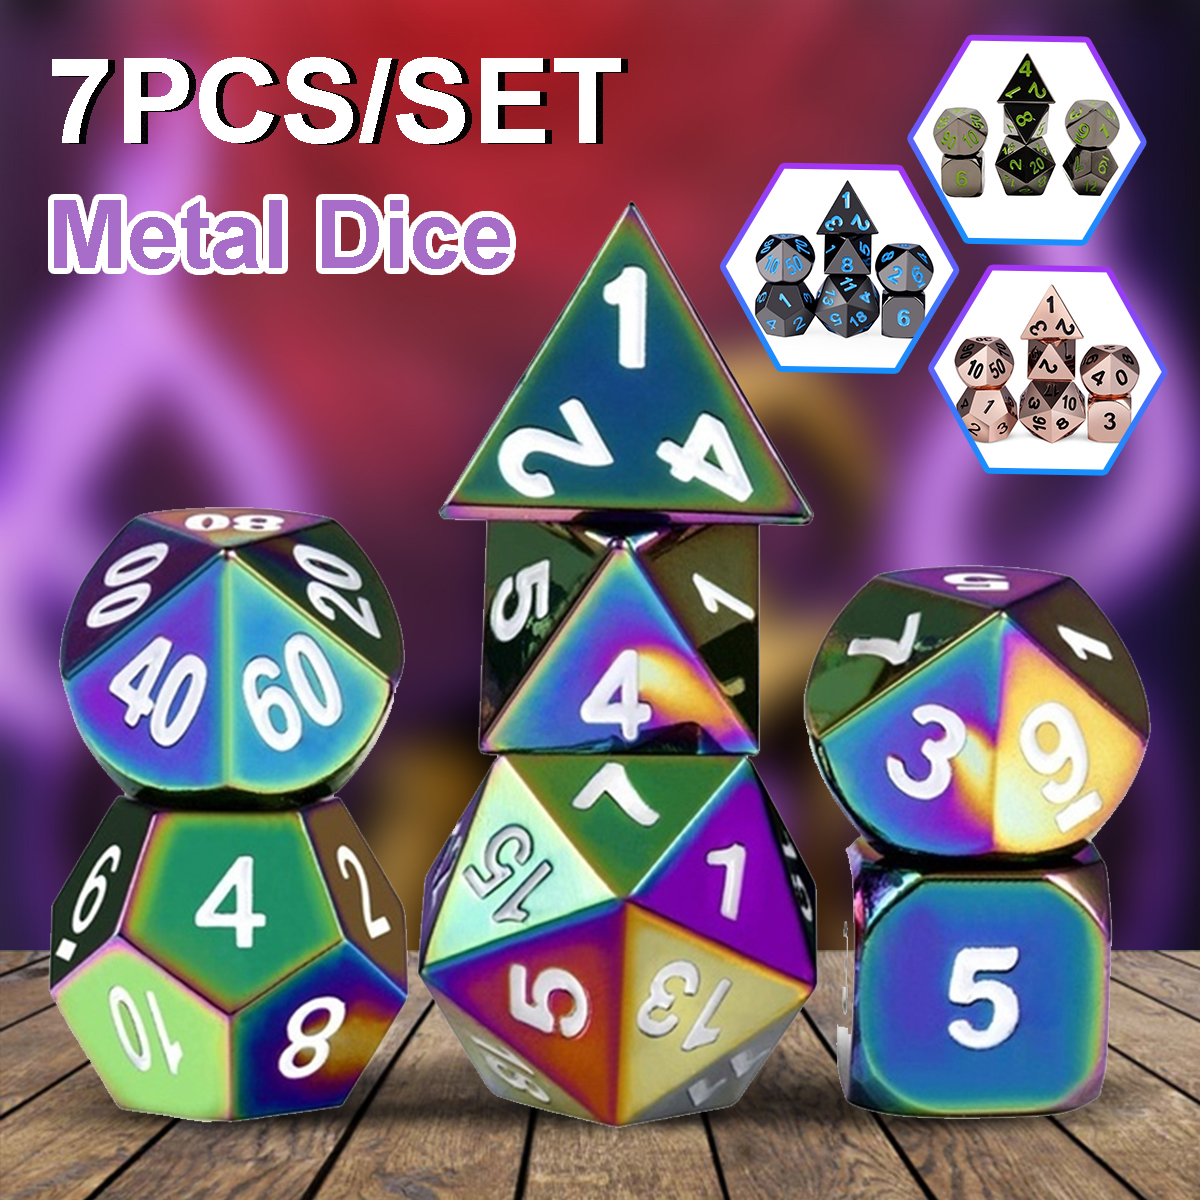 7-PcsSet-Metal-Dice-Set-Role-Playing-Dragons-Table-Game-With-Cloth-Bag-Bar-Party-Game-Dice-1677684-1